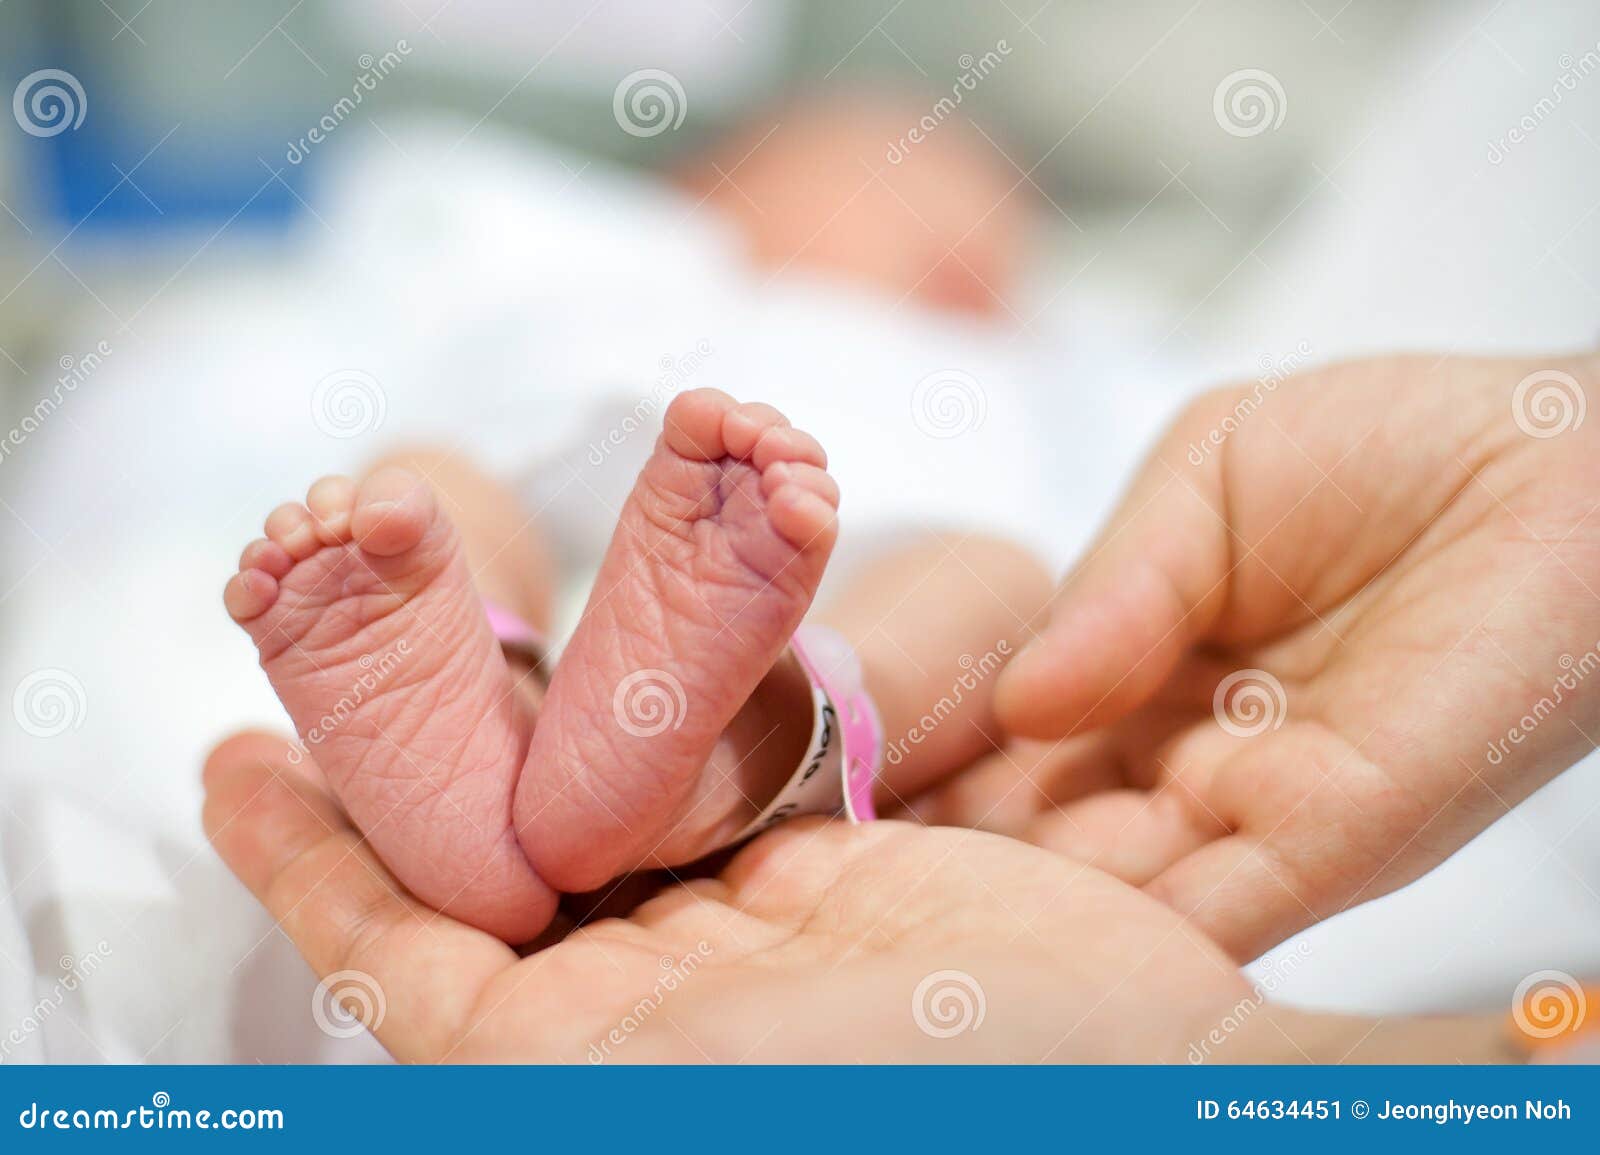 the picture was taken from newborn to obstetrics and gynecology